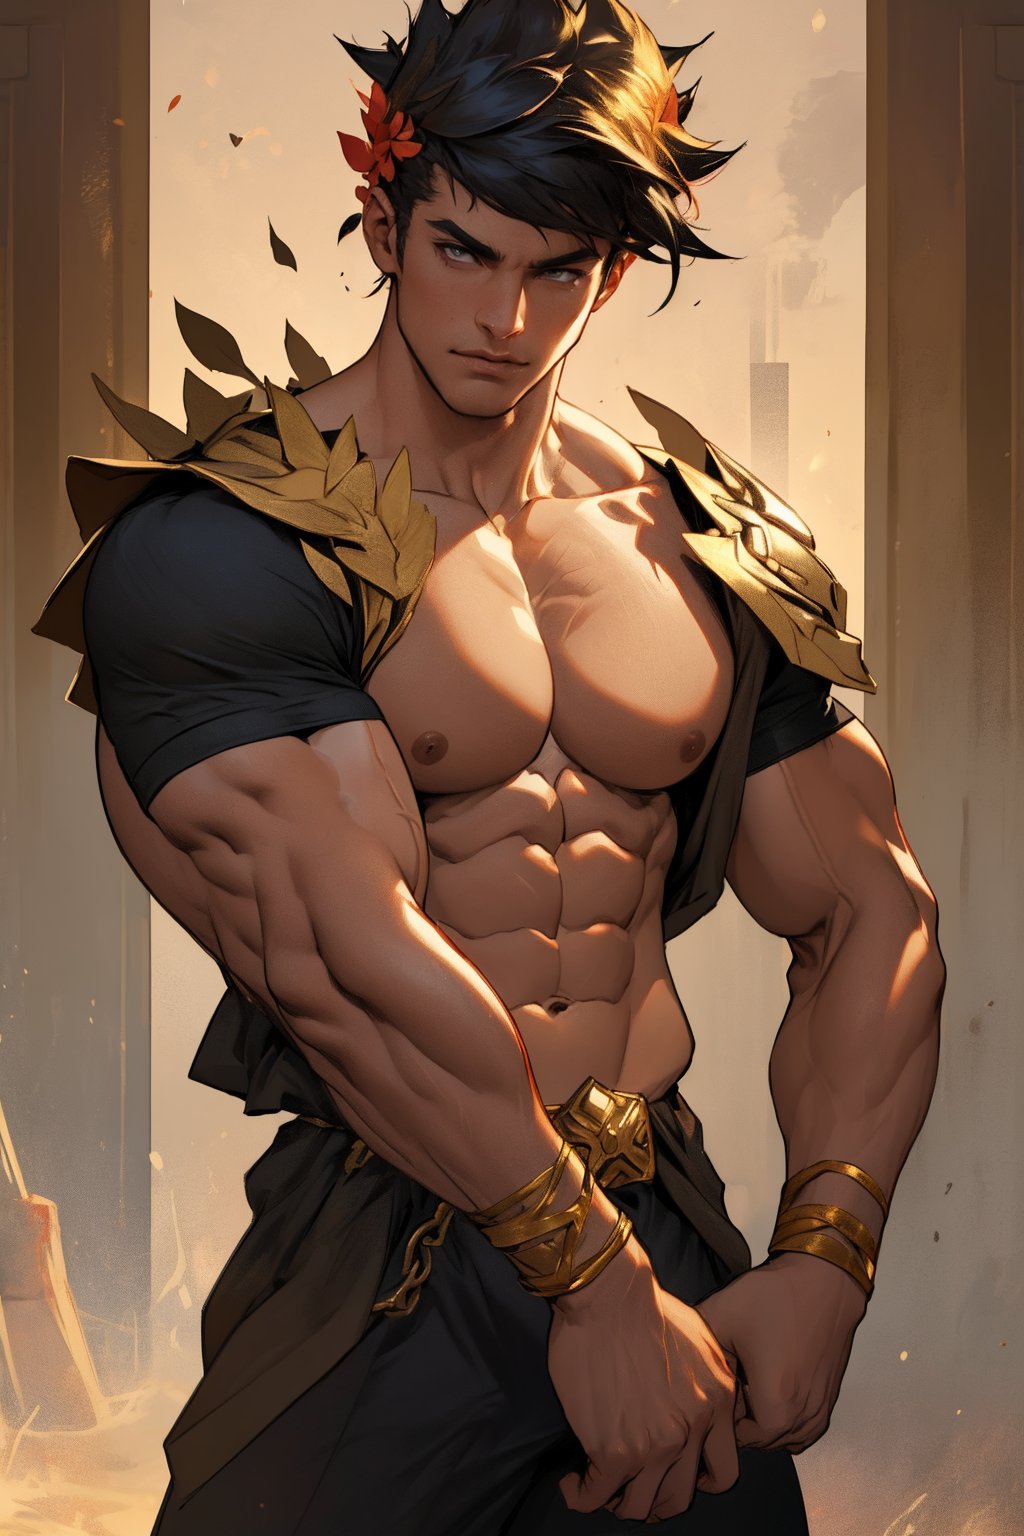 Zagreus' chiseled physique fills the frame, broad chest and bulging biceps radiating strength under warm golden lighting. Neutral background emphasizes his powerful shoulders, defined abs, and confident stance, weight evenly distributed between two feet as he stands proud, awaiting challenge or adventure.